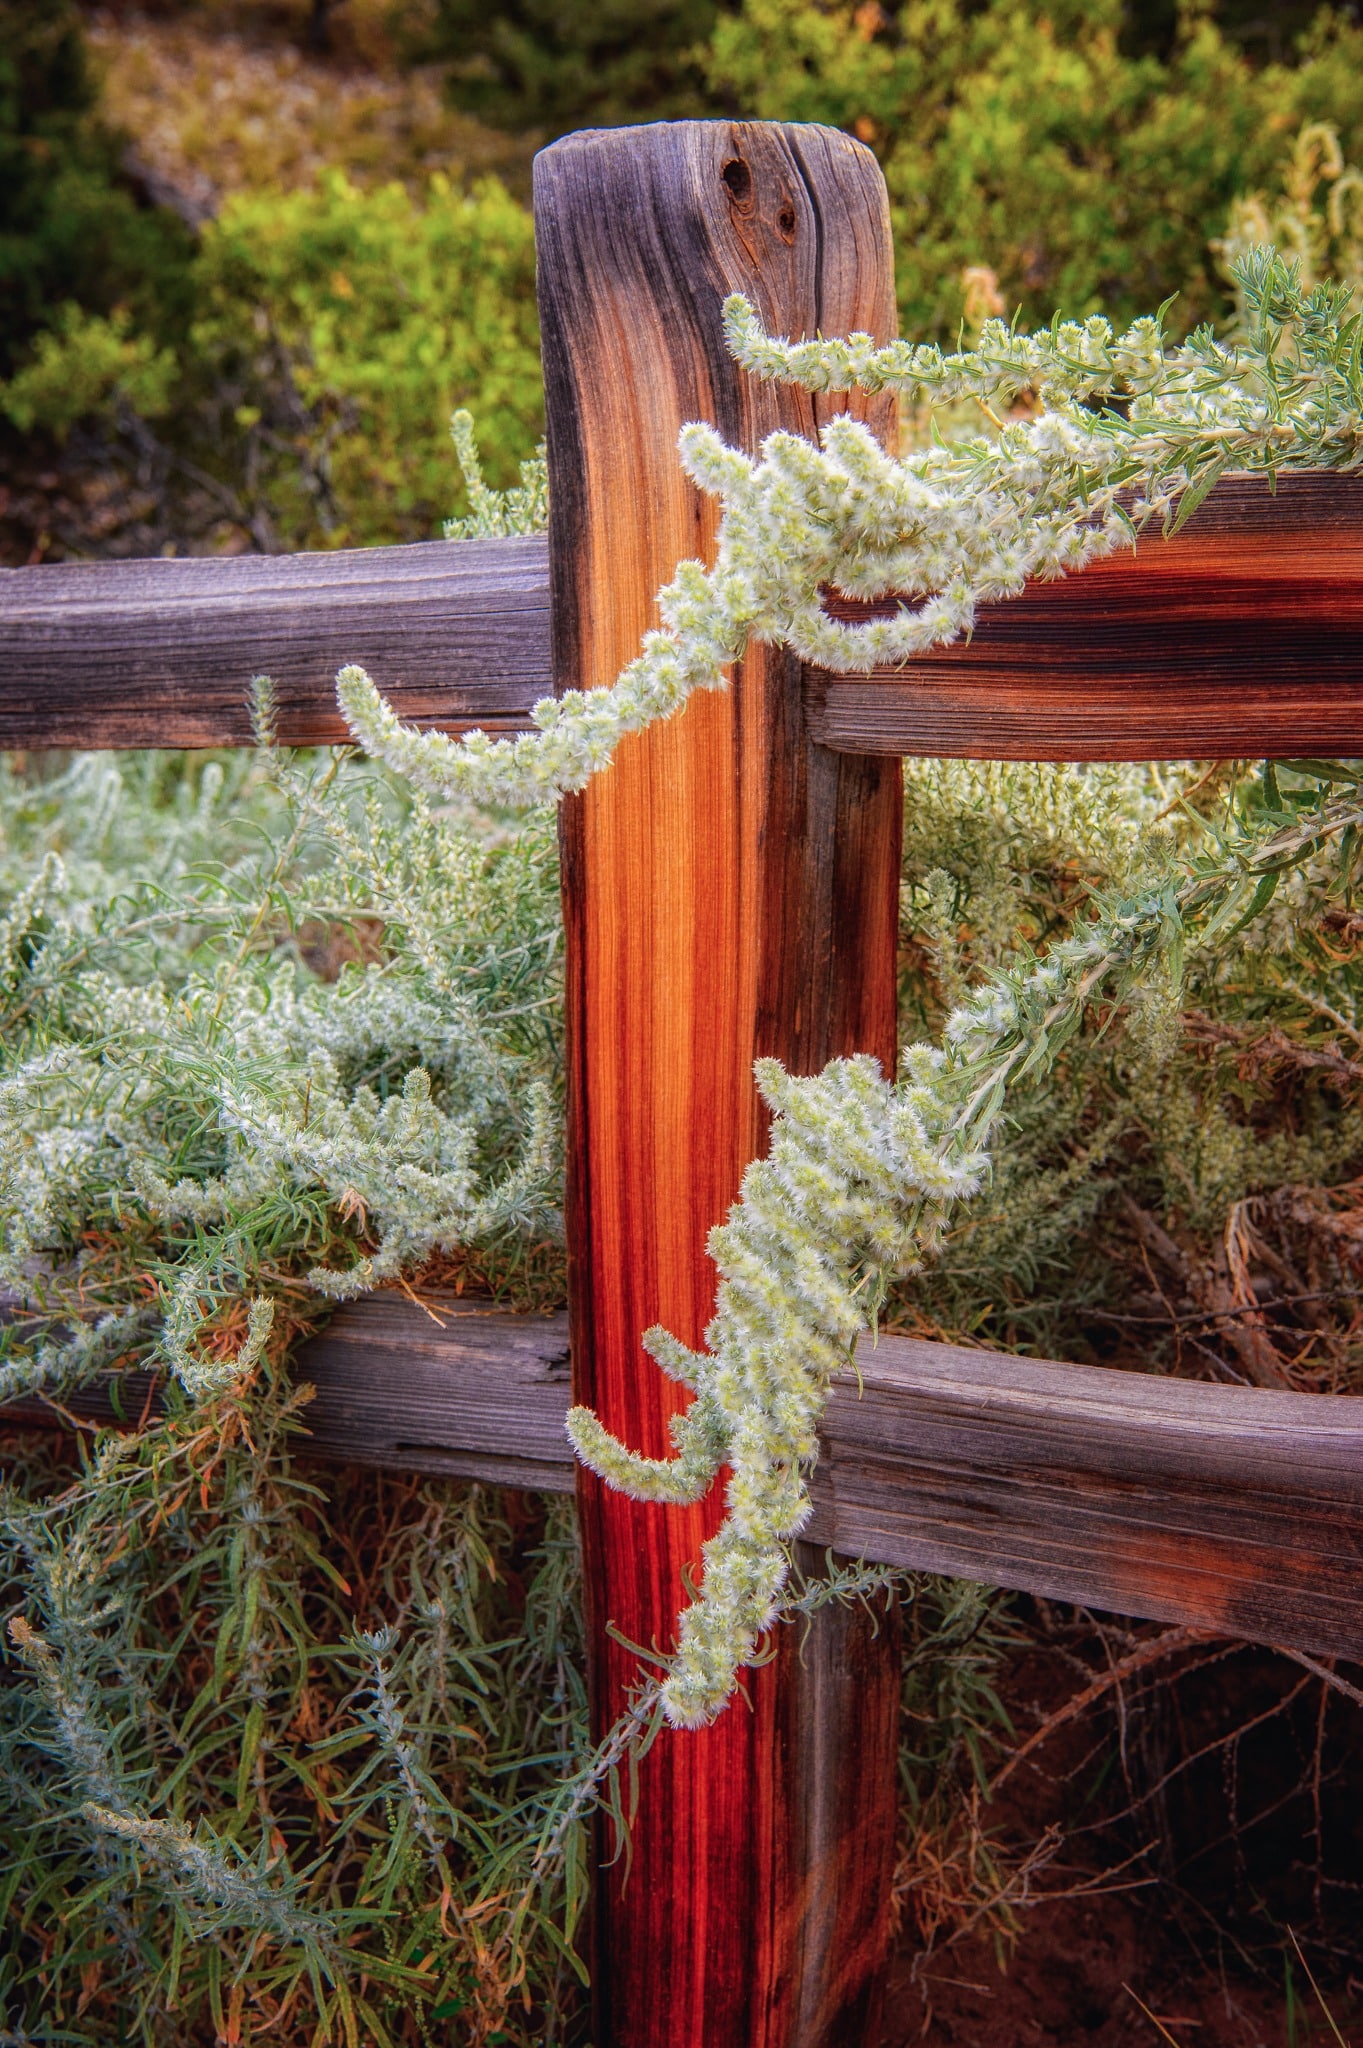 Tendrils of winterfat draps over the rails of a wooden fence in Great Sand Dunes National Park and Preserve near Alamosa, Colorado.